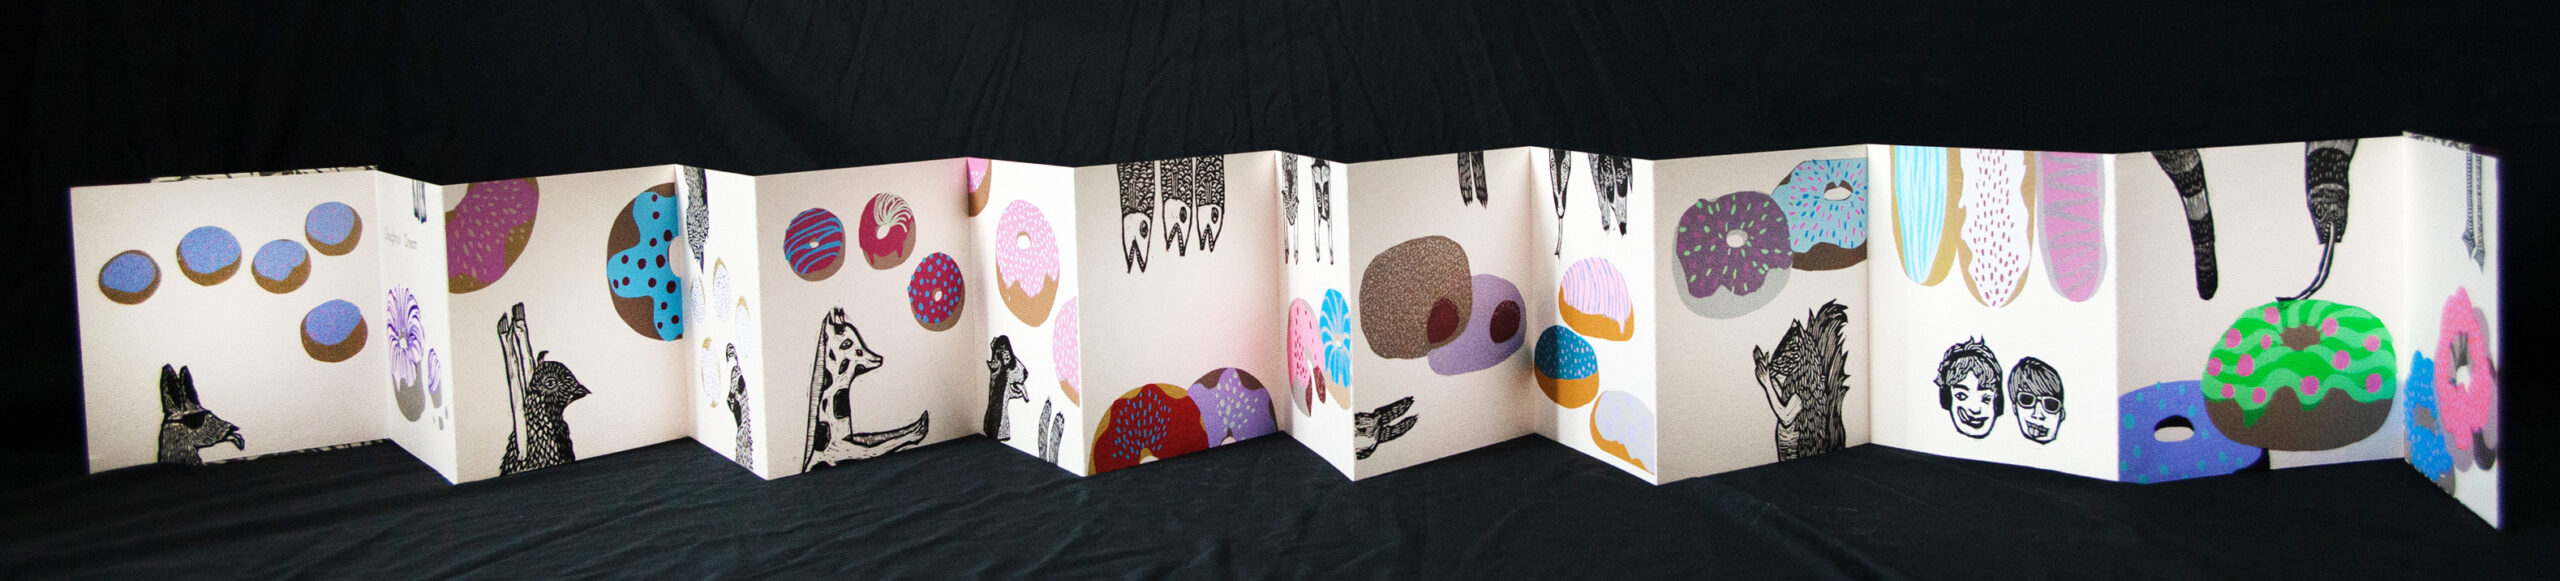 An accordion bound artist book featuring colorful relief printed doughnuts and black and white relief printed humans and animals, each salivating over or reaching for the doughnuts.